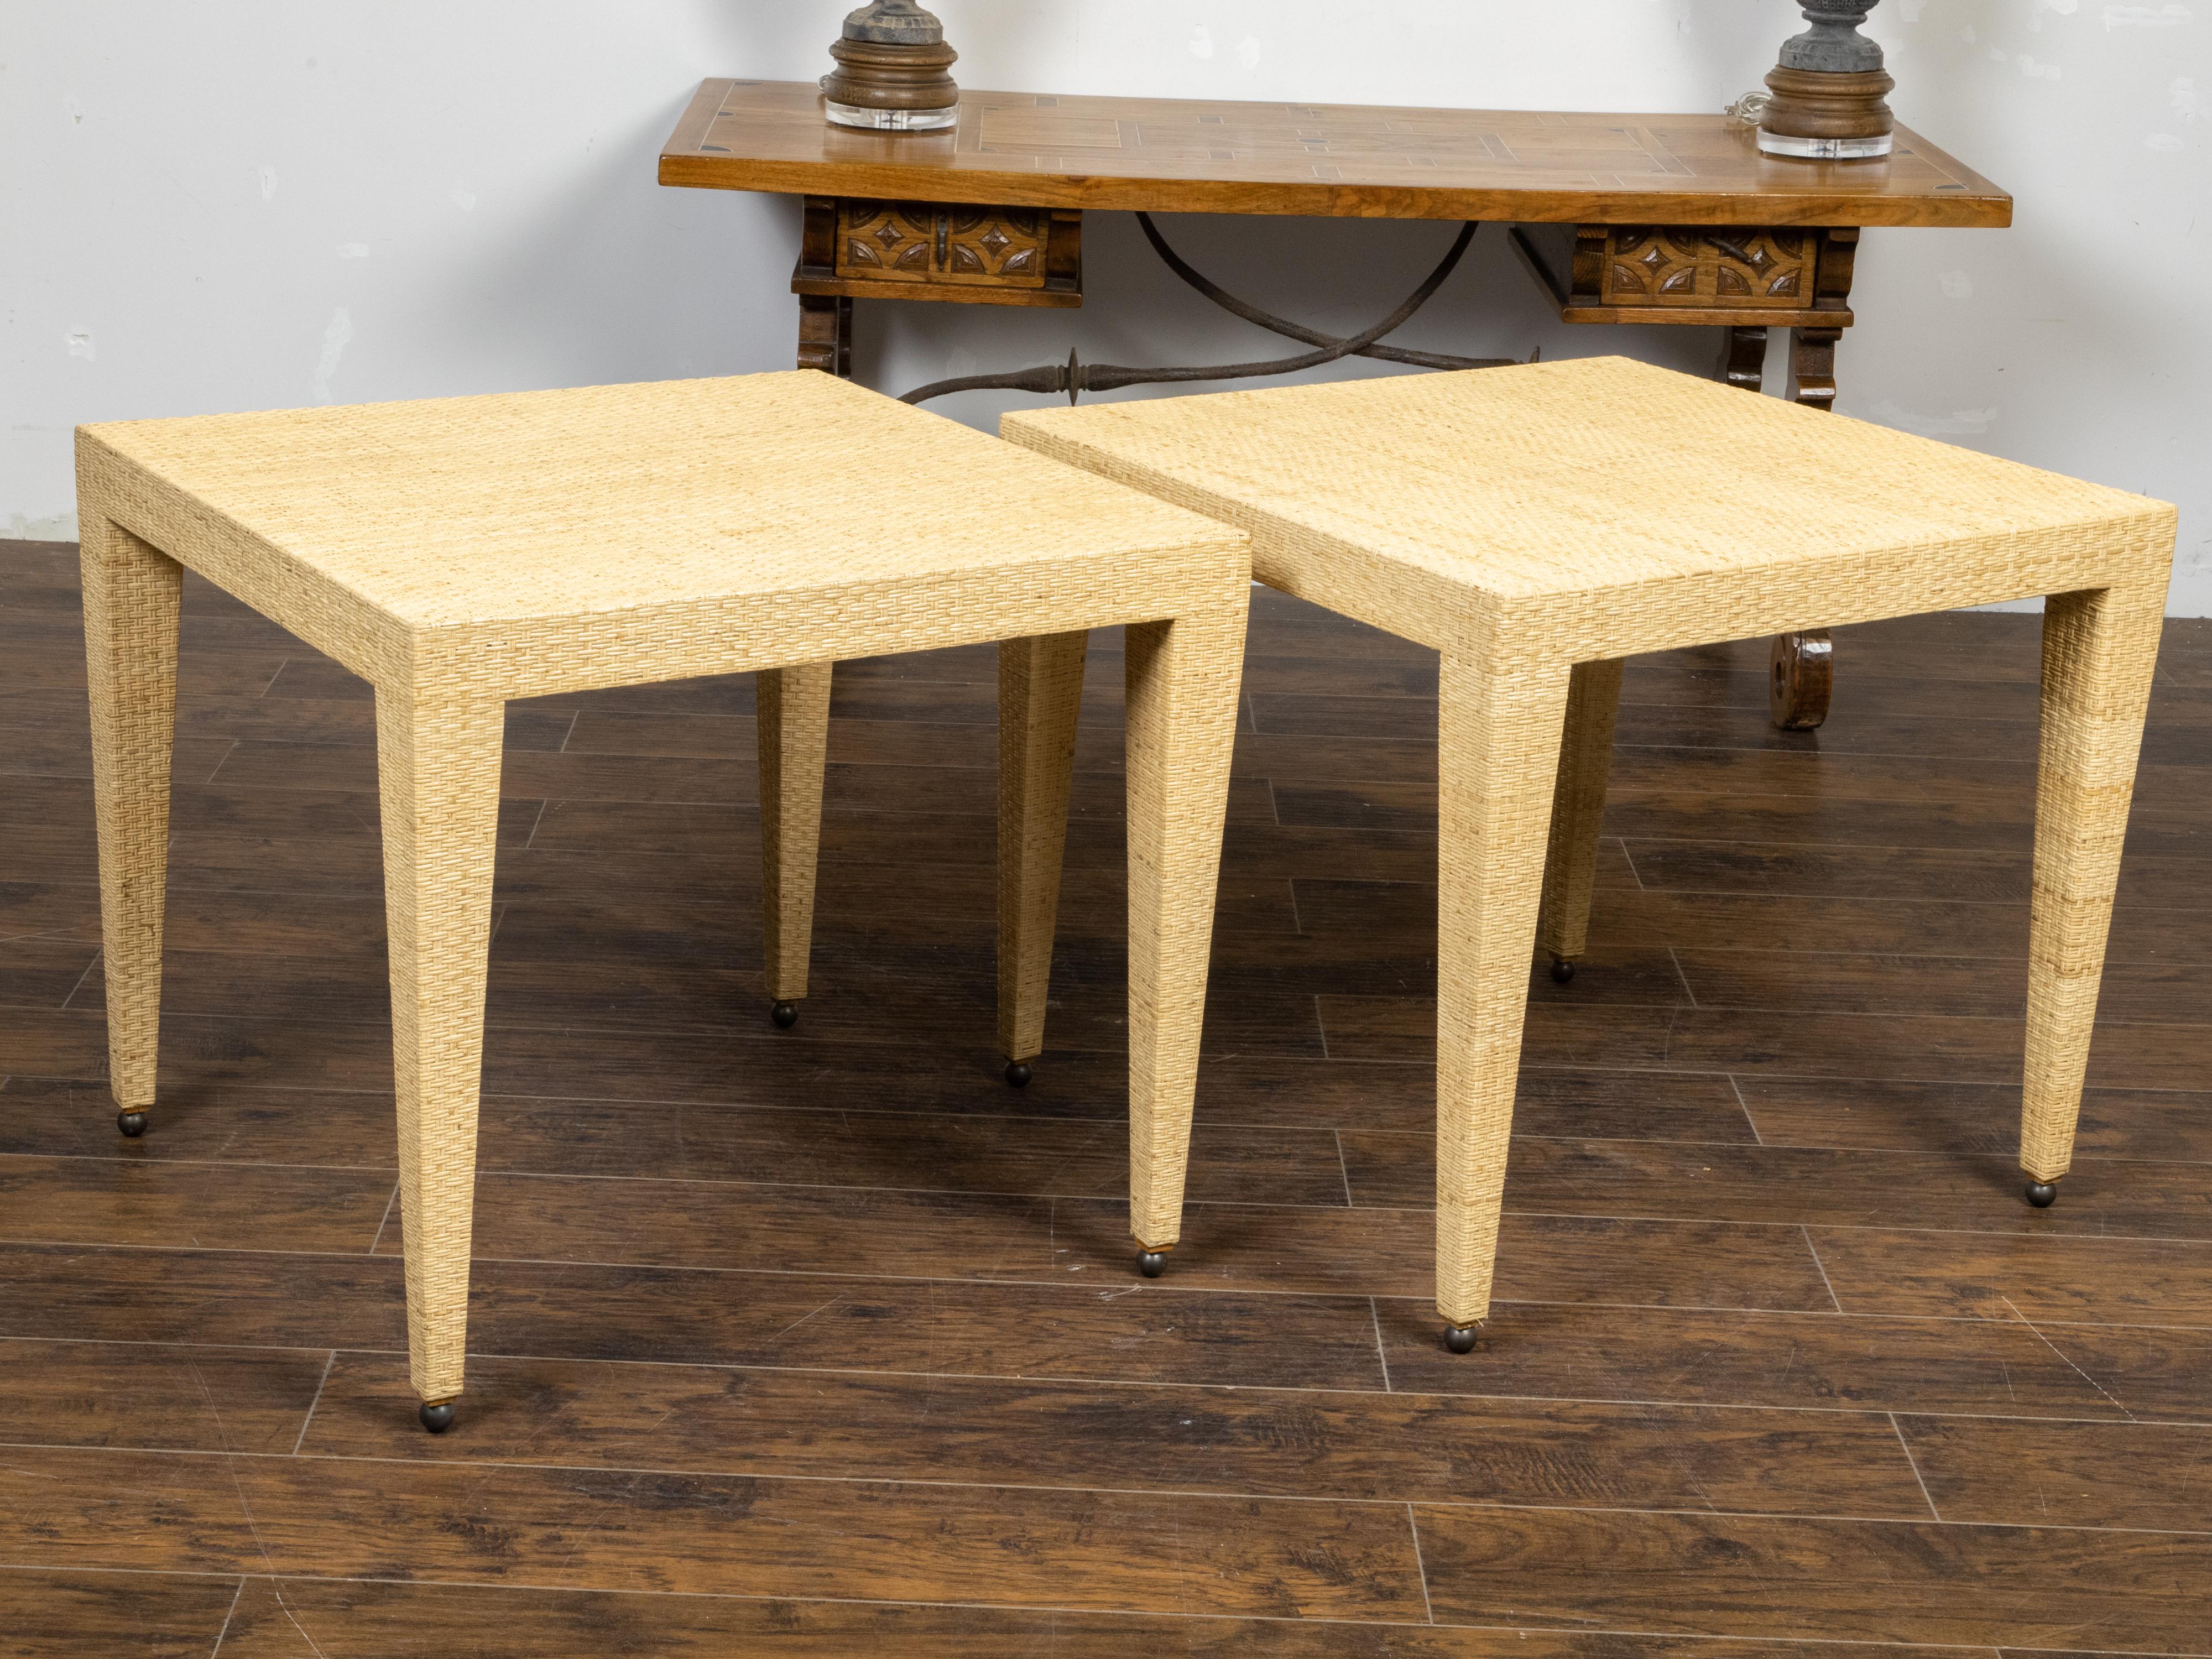 Pair of Baker Furniture Midcentury Wicker Side Tables with Tapered Legs For Sale 1